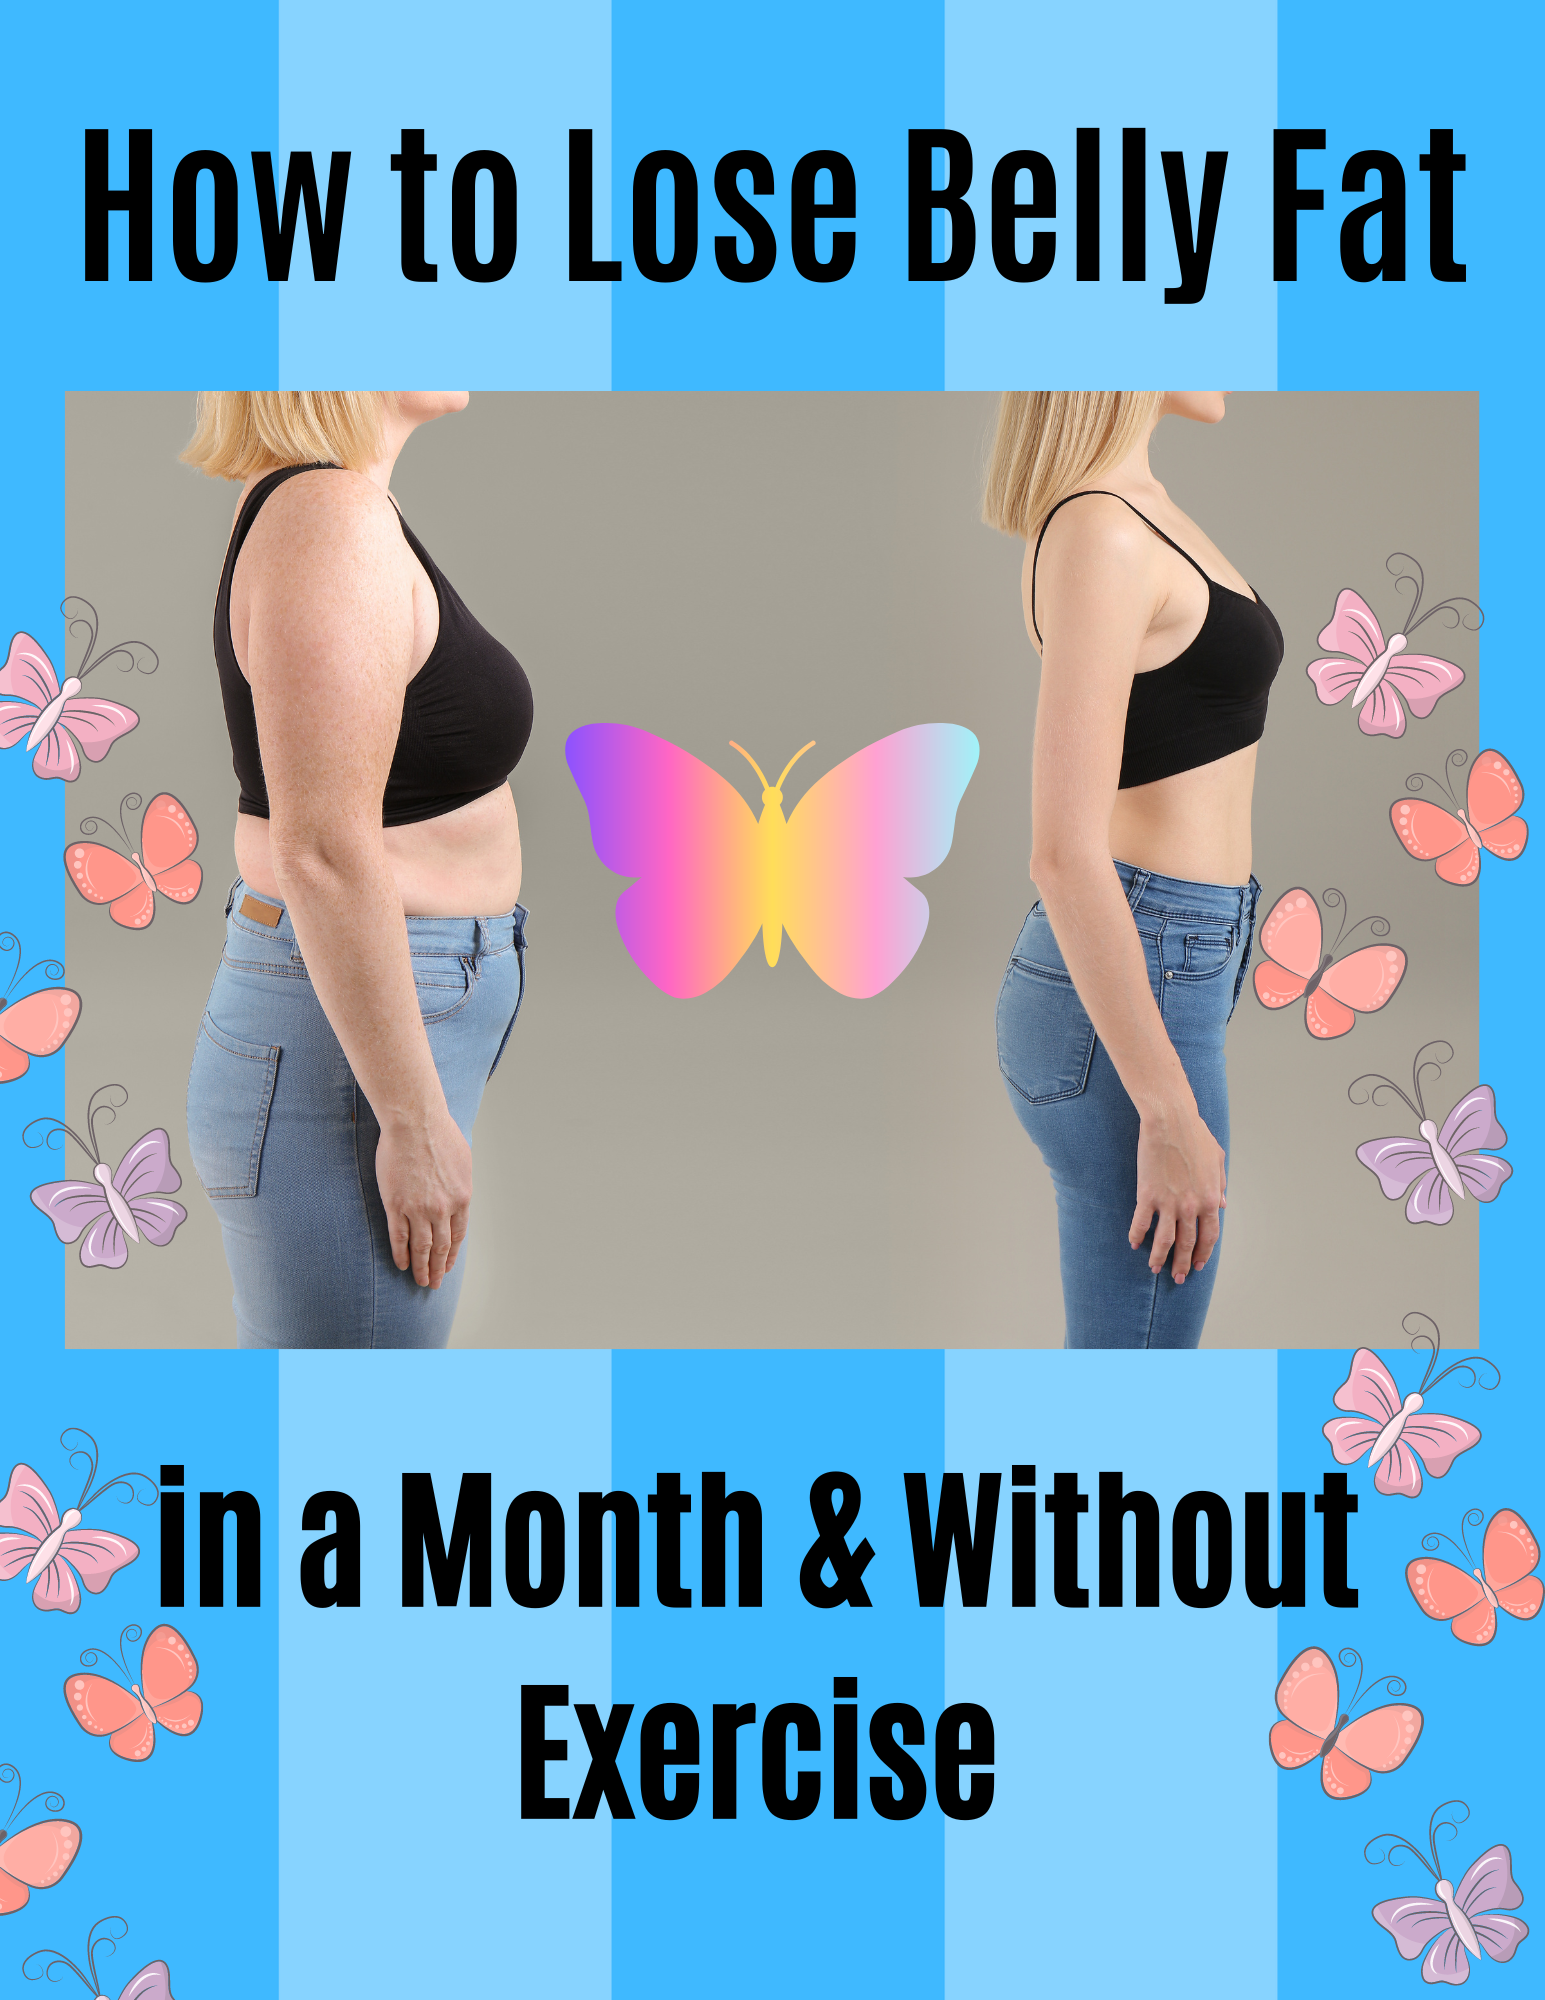 How to Lose Belly fat in a month